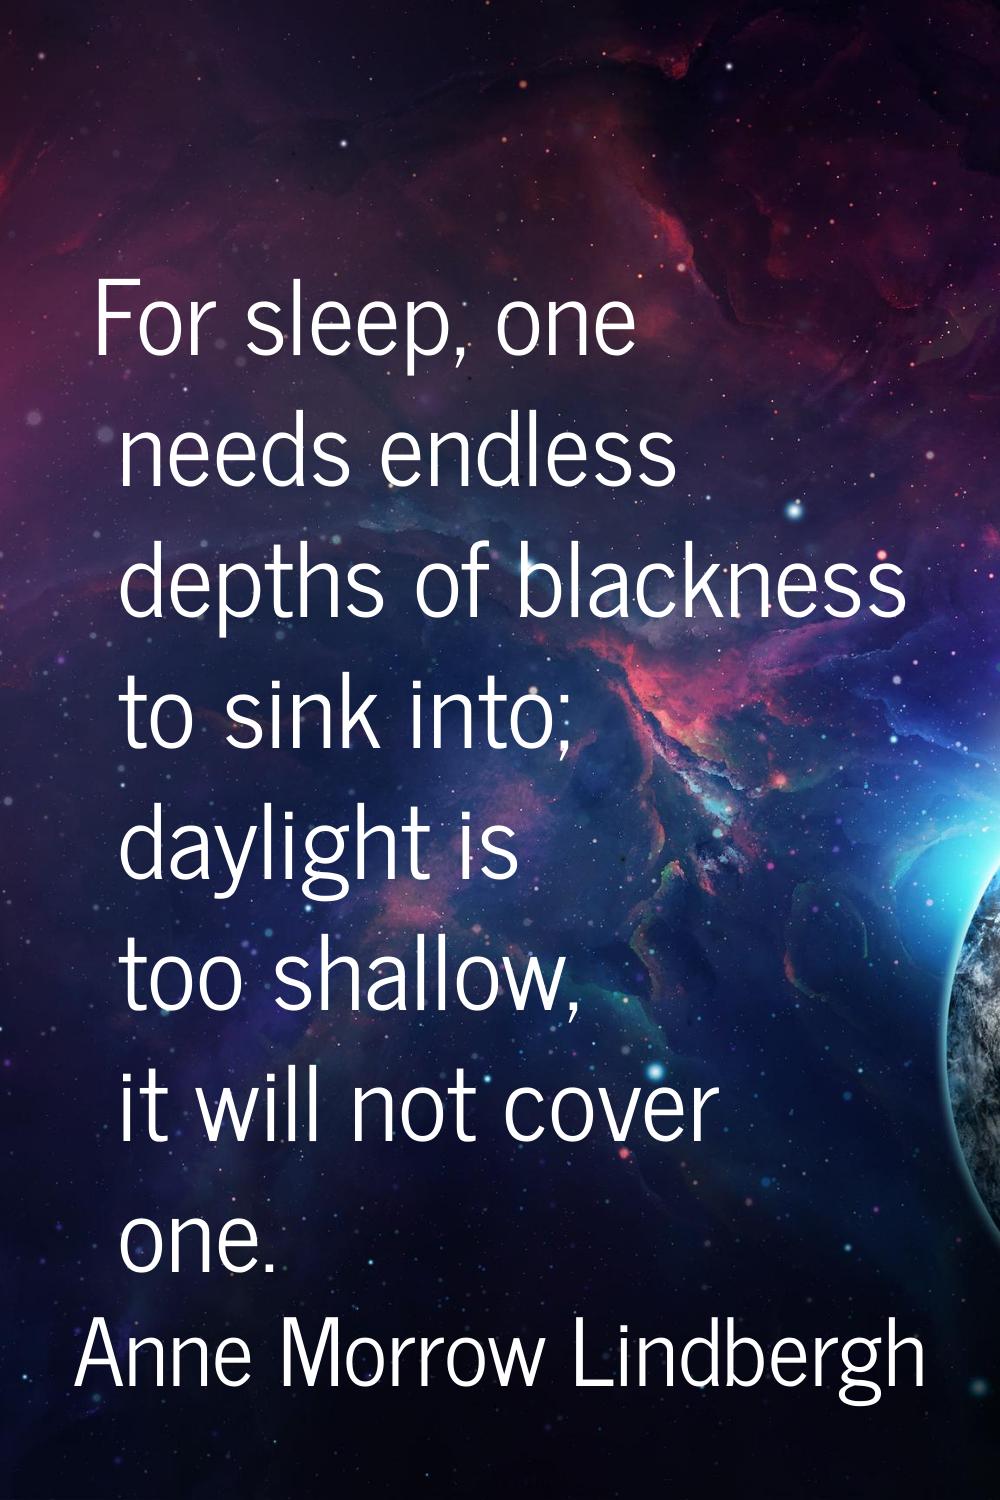 For sleep, one needs endless depths of blackness to sink into; daylight is too shallow, it will not